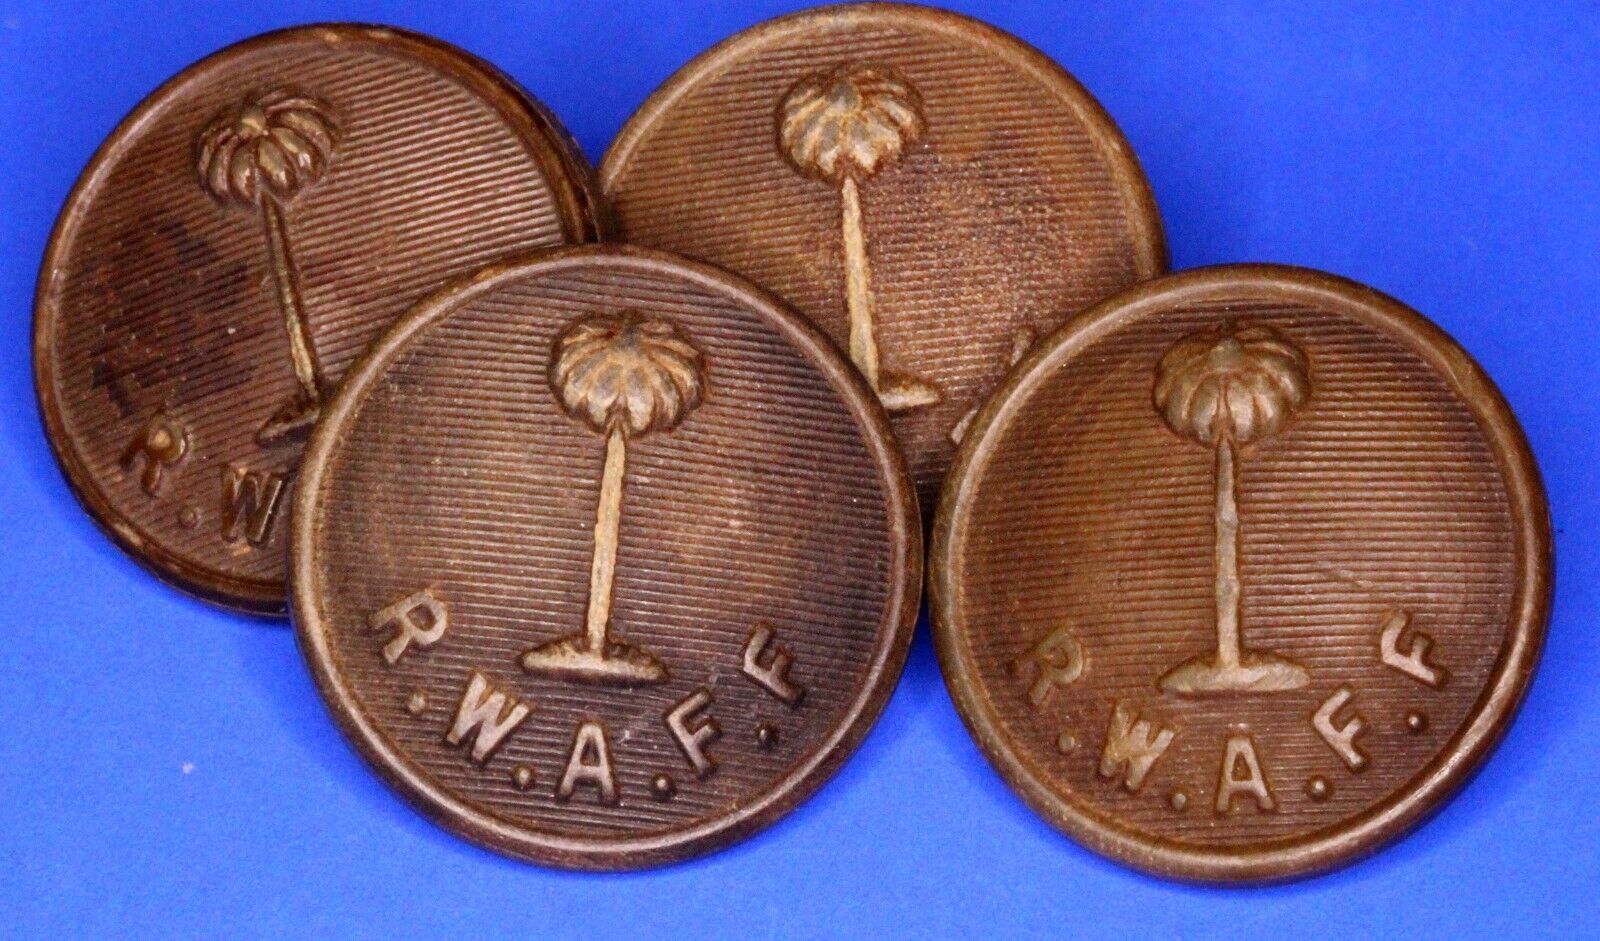 Royal West African Frontier Force (RWAFF) Bakelite Buttons 21mm [24107]